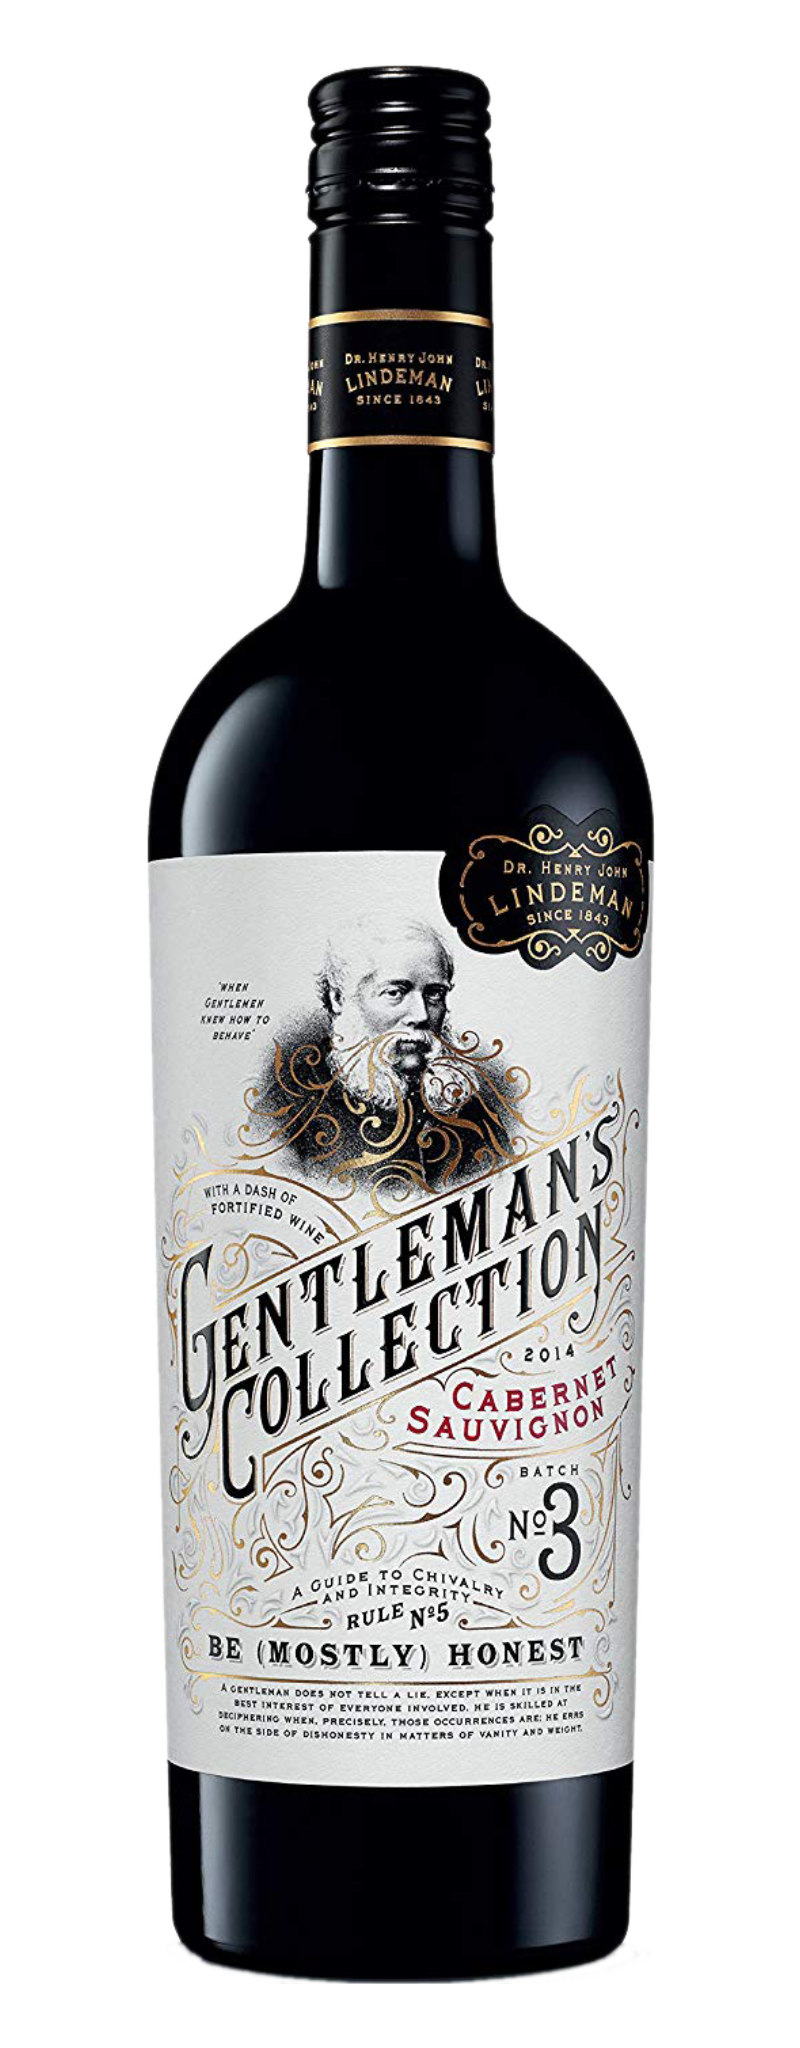 Dr Henny Linderman's, Gentleman's Collection, Cabernet Sauvignon, Batch N°3, South Eastern  - 750ml